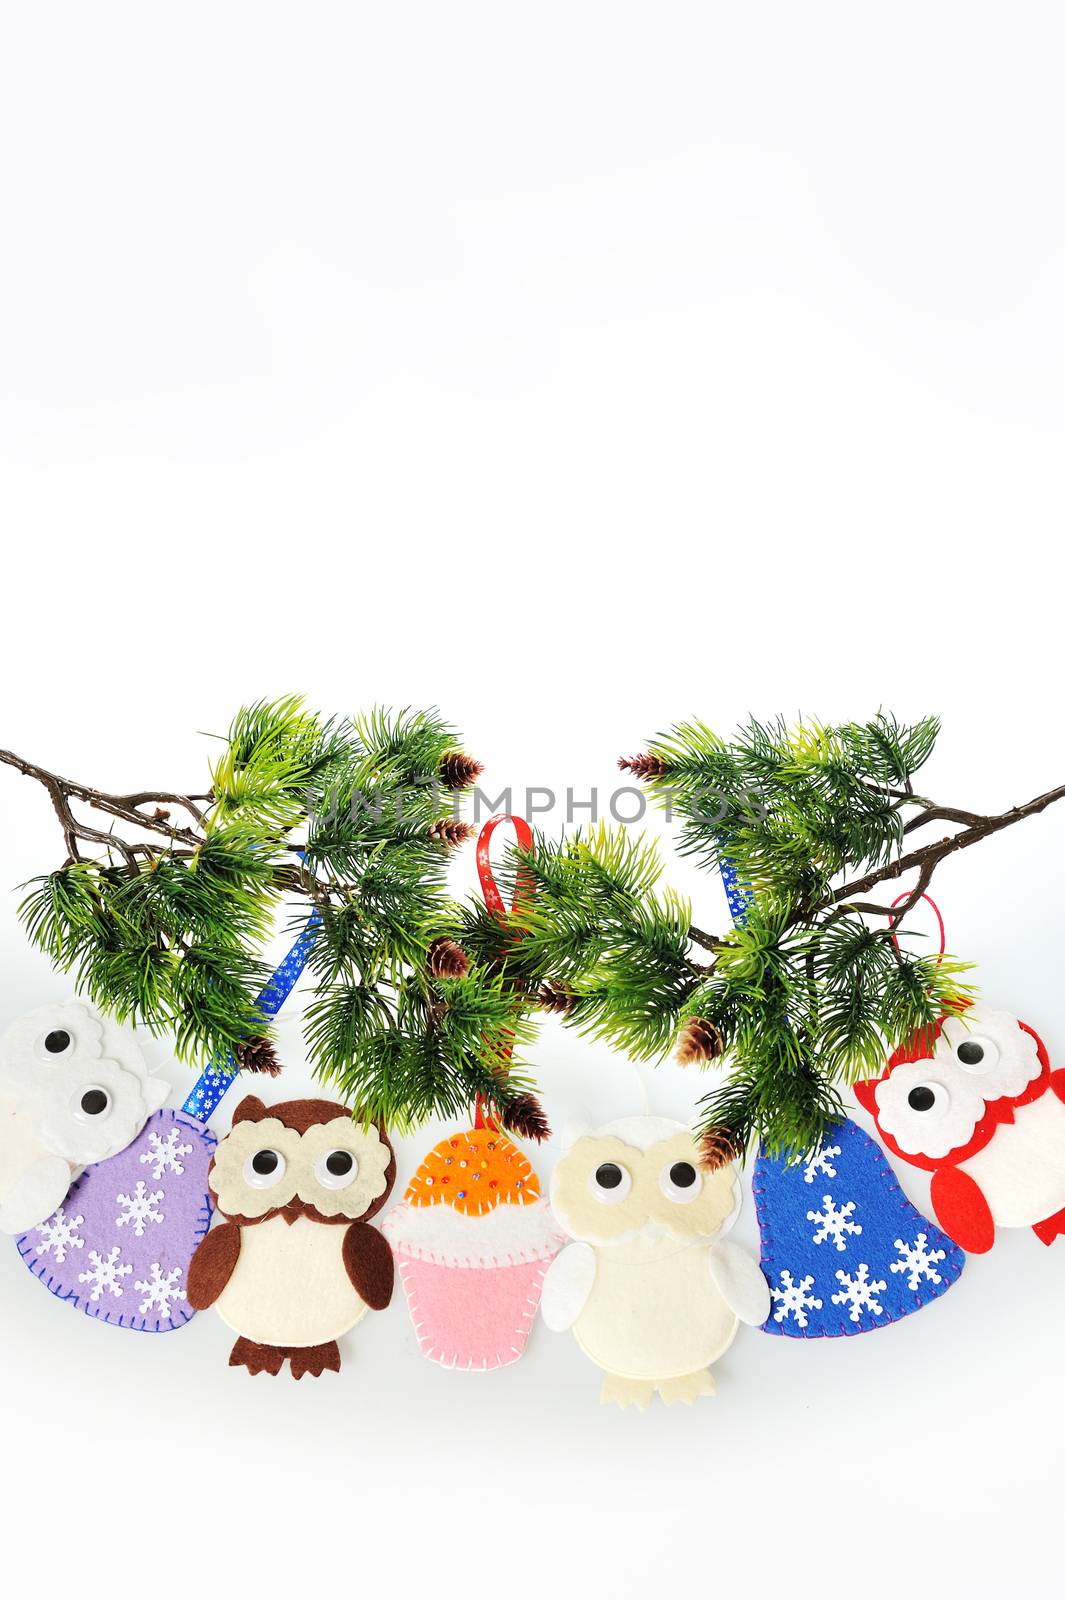 Handmade Christmas decorations made of felt hanging on a rope. Felt Santa boots, felt Christmas tree and felt mittens. owl, a bell and a Cake